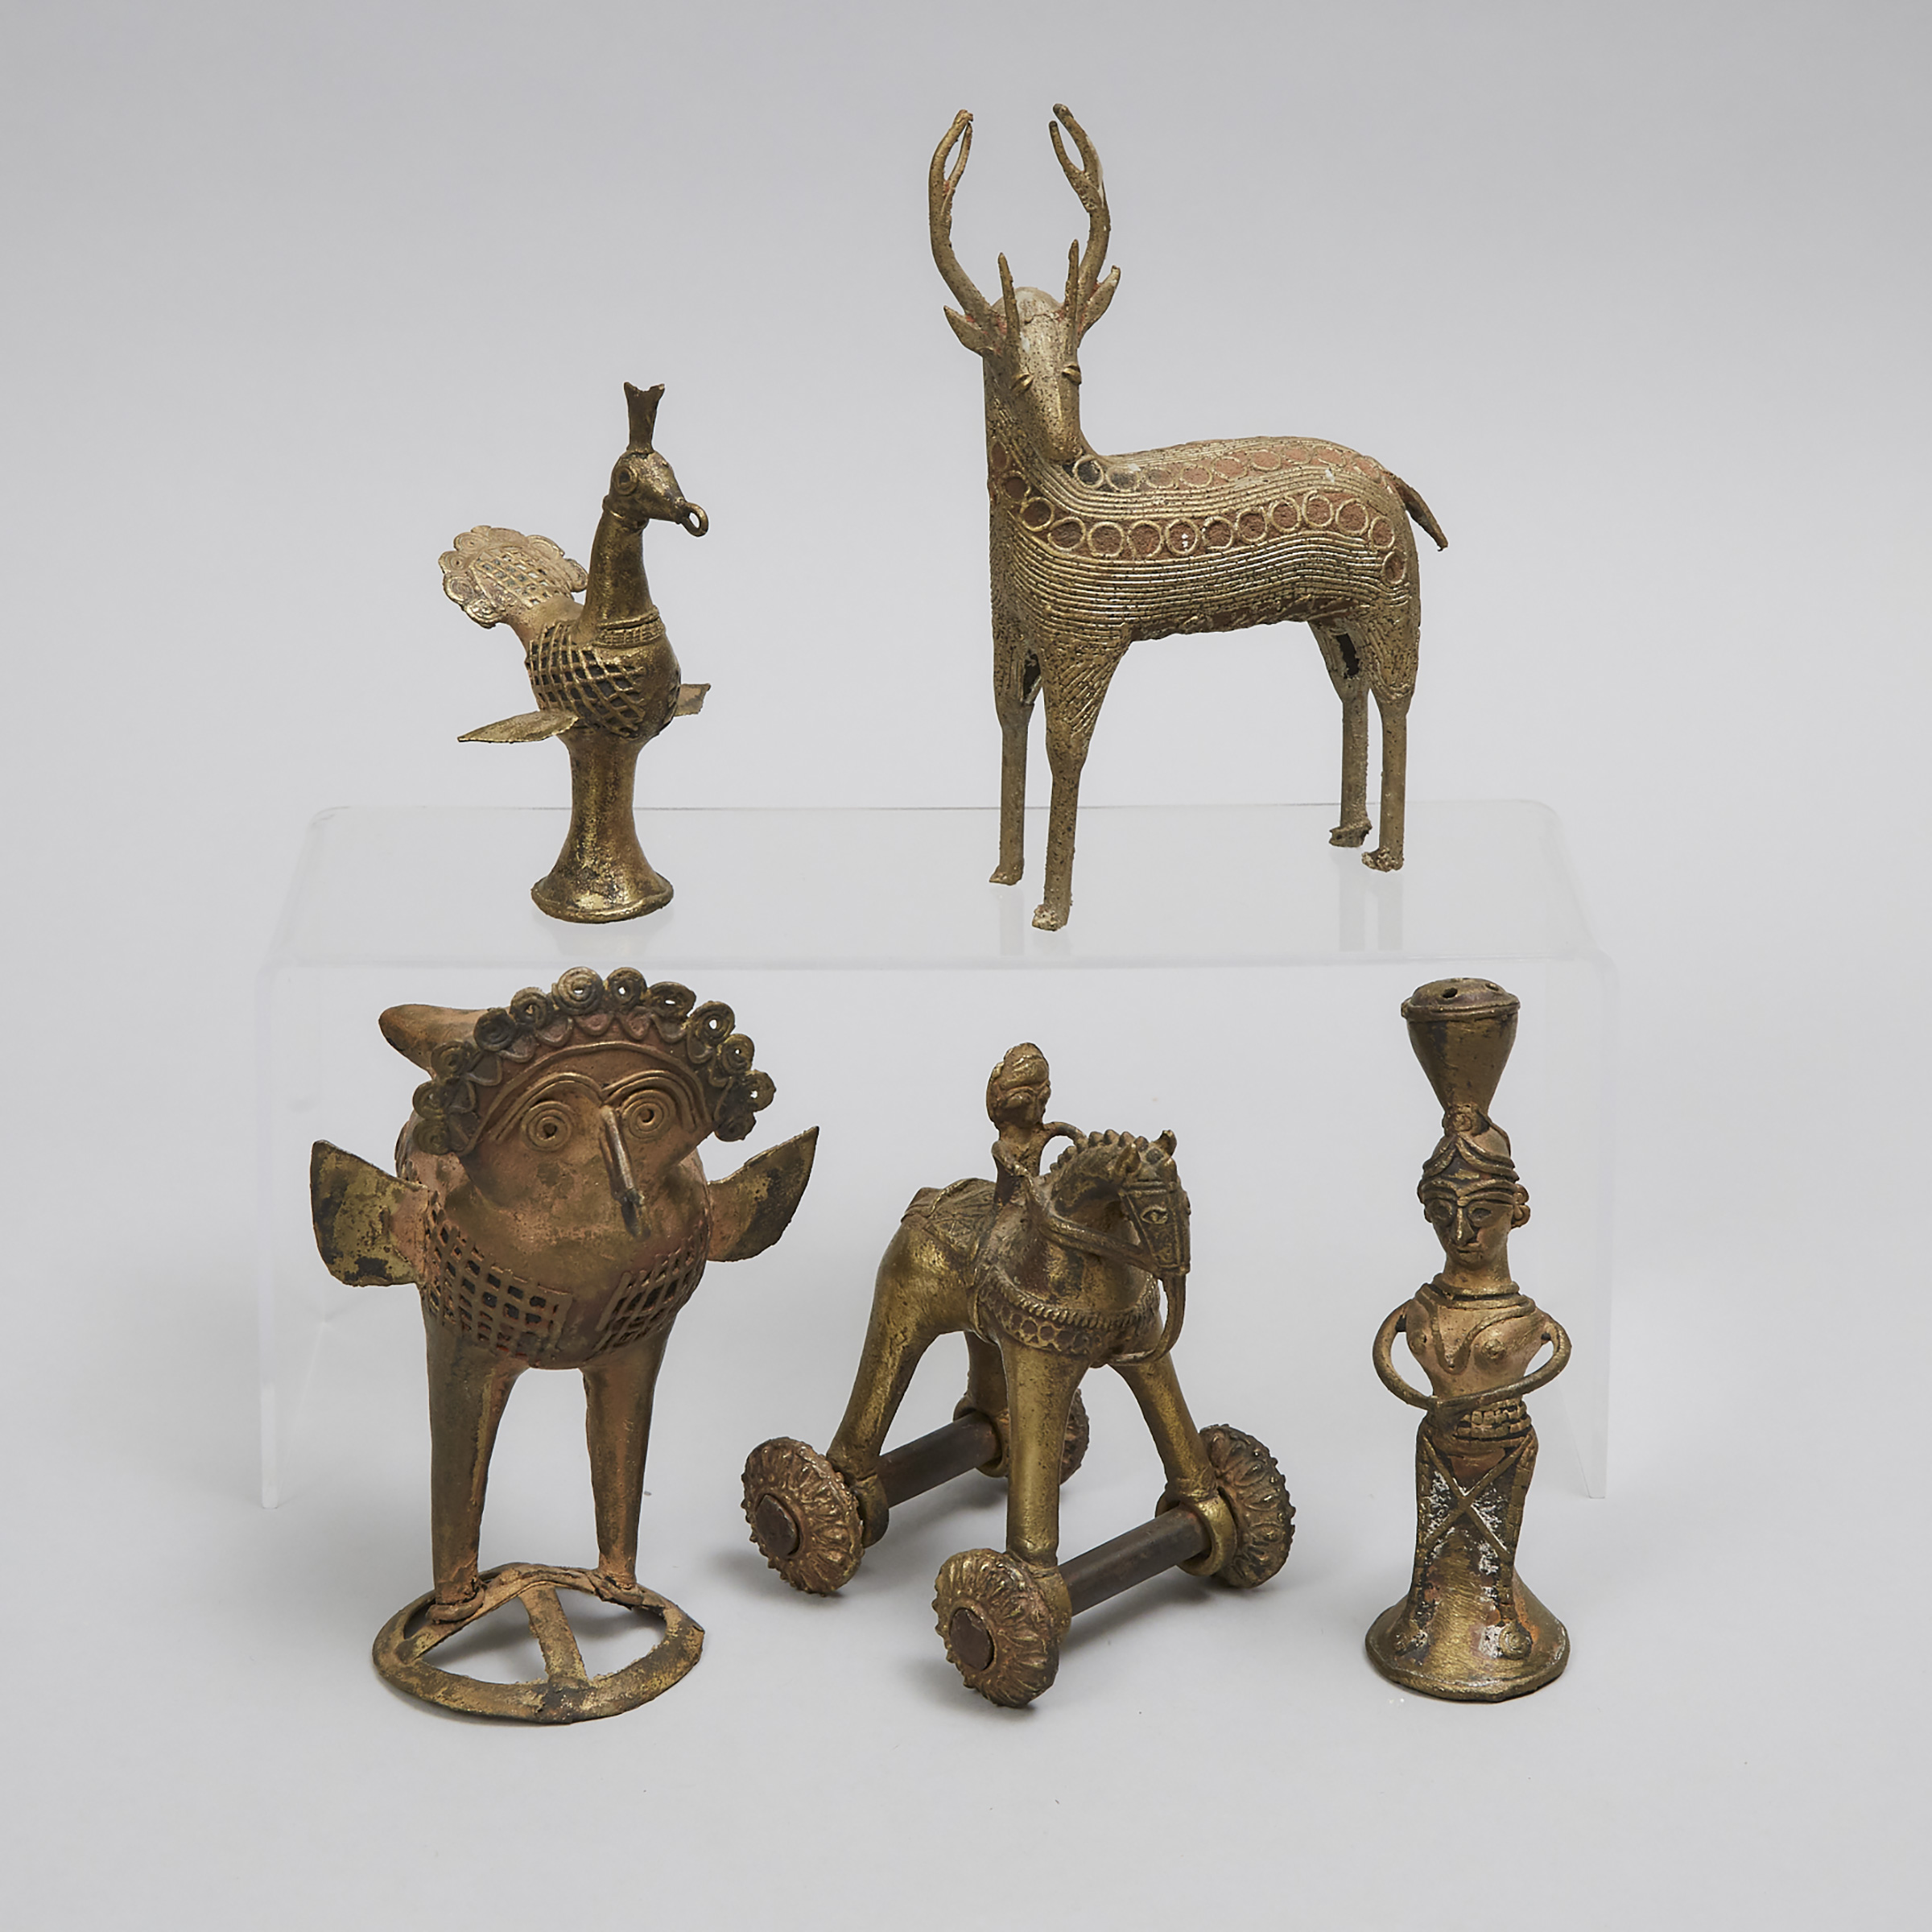 Five Hindu Temple Dhokra Figures, 19th/early 20th century